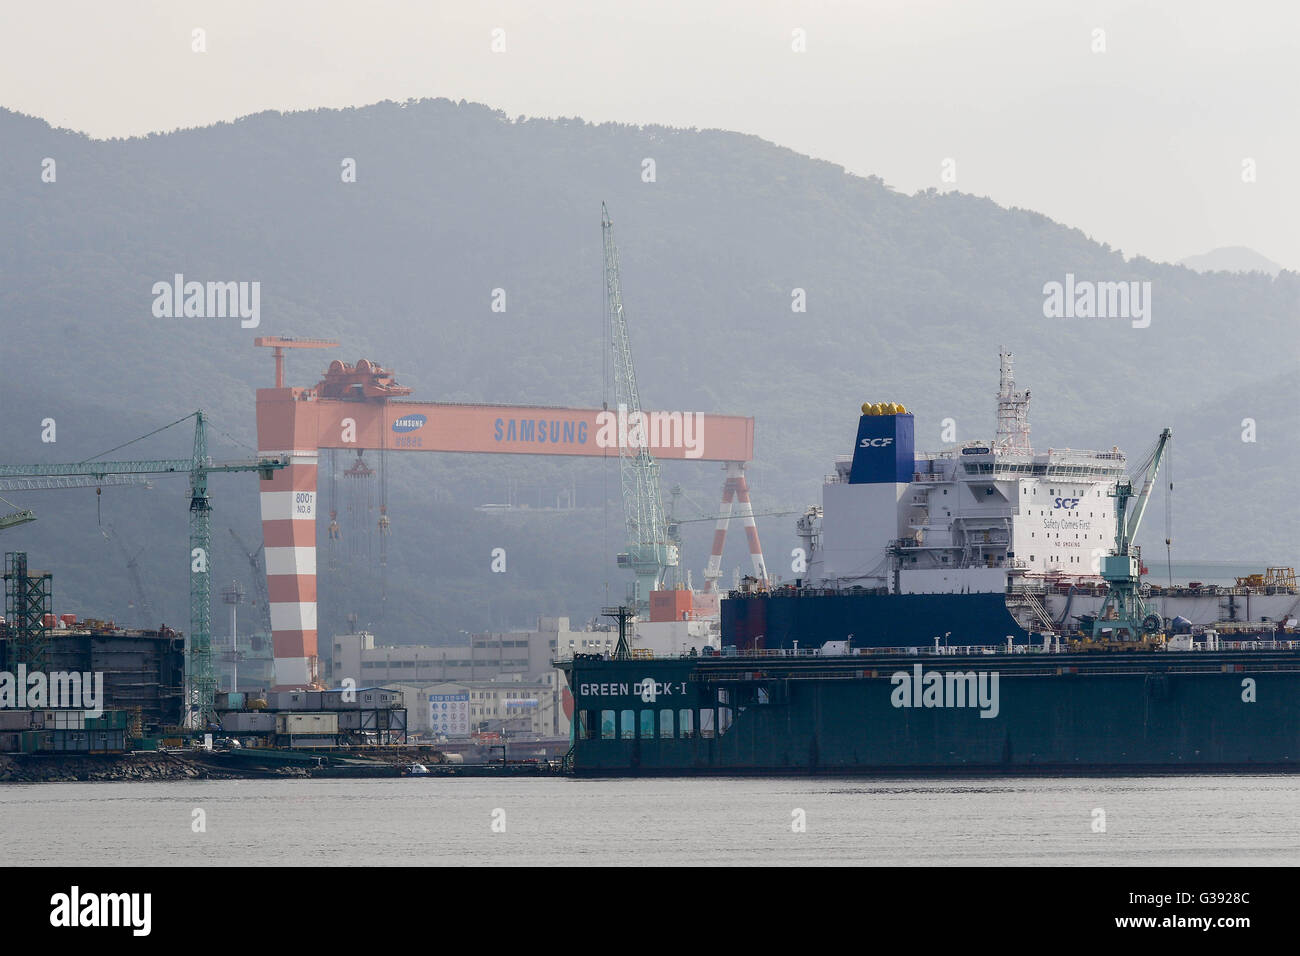 June 7, 2016 - Geoje, Gyeongnam, South Korea - Ships under construction sit moored at the Samsung Heavy Industry shipyard in Geoje, South Korea. Shipbuilding has been central to South Korea's economy since the 1970s. Ships accounted for 8.5 percent of the country's total exports through June 20 of October 2015, according to the trade ministry. After more than a decade of global dominance, South Korea's shipbuilders face an unprecedented crisis that threatens the very survival of one of the flagship industries of Asia's fourth largest economy. Major South Korean shipbuilders plan to restructure Stock Photo